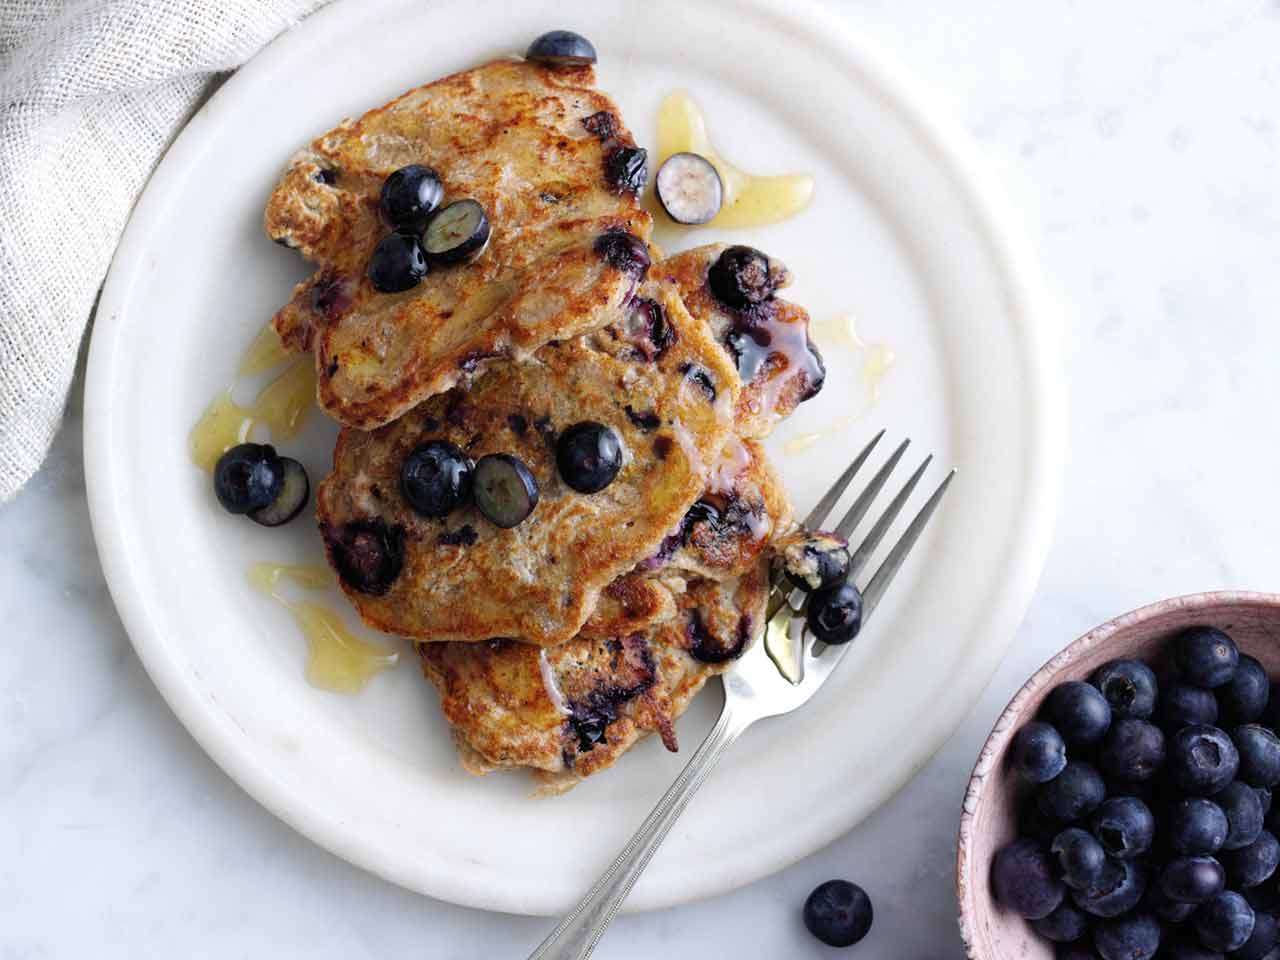 Vegan pancakes with oats and blueberries